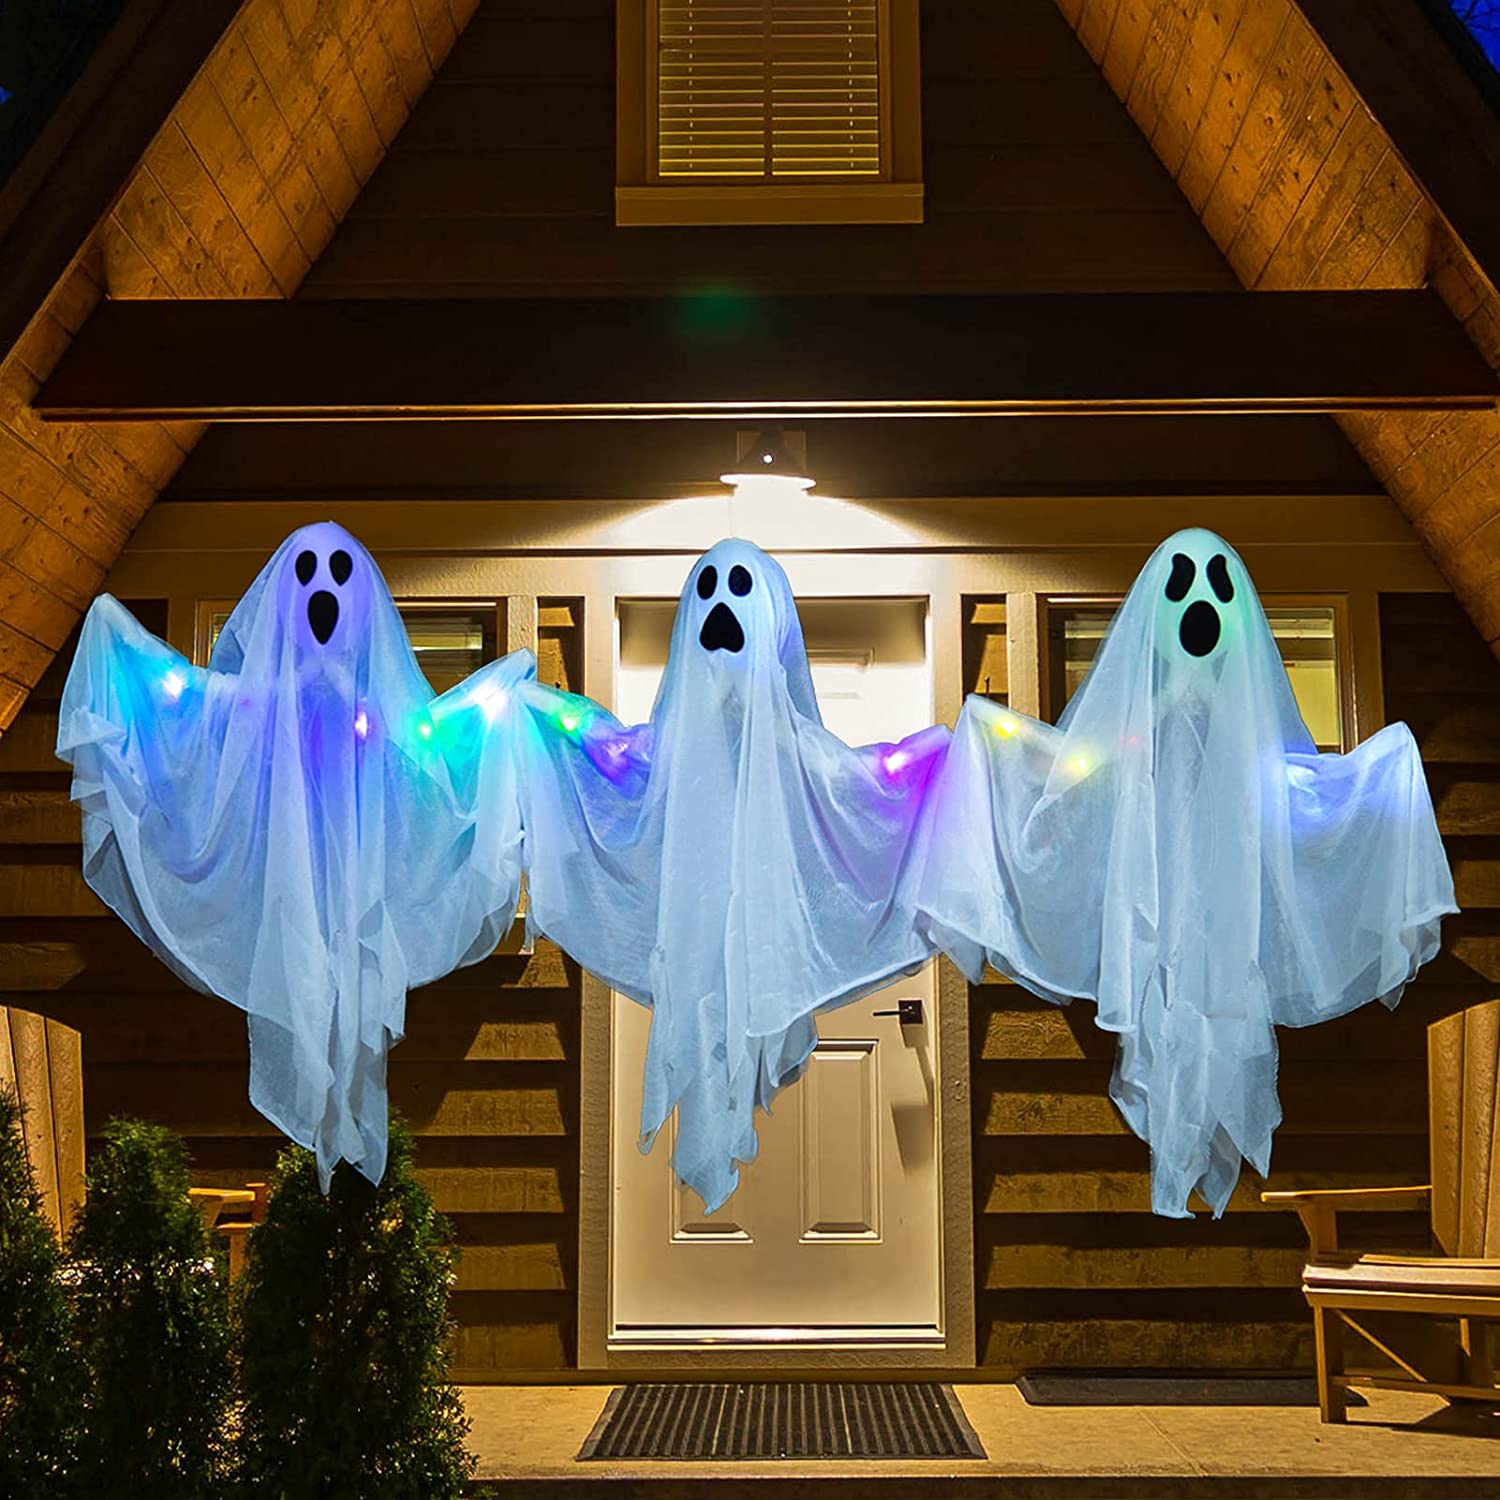 Ghosts in the yard - Halloween decor from the other side